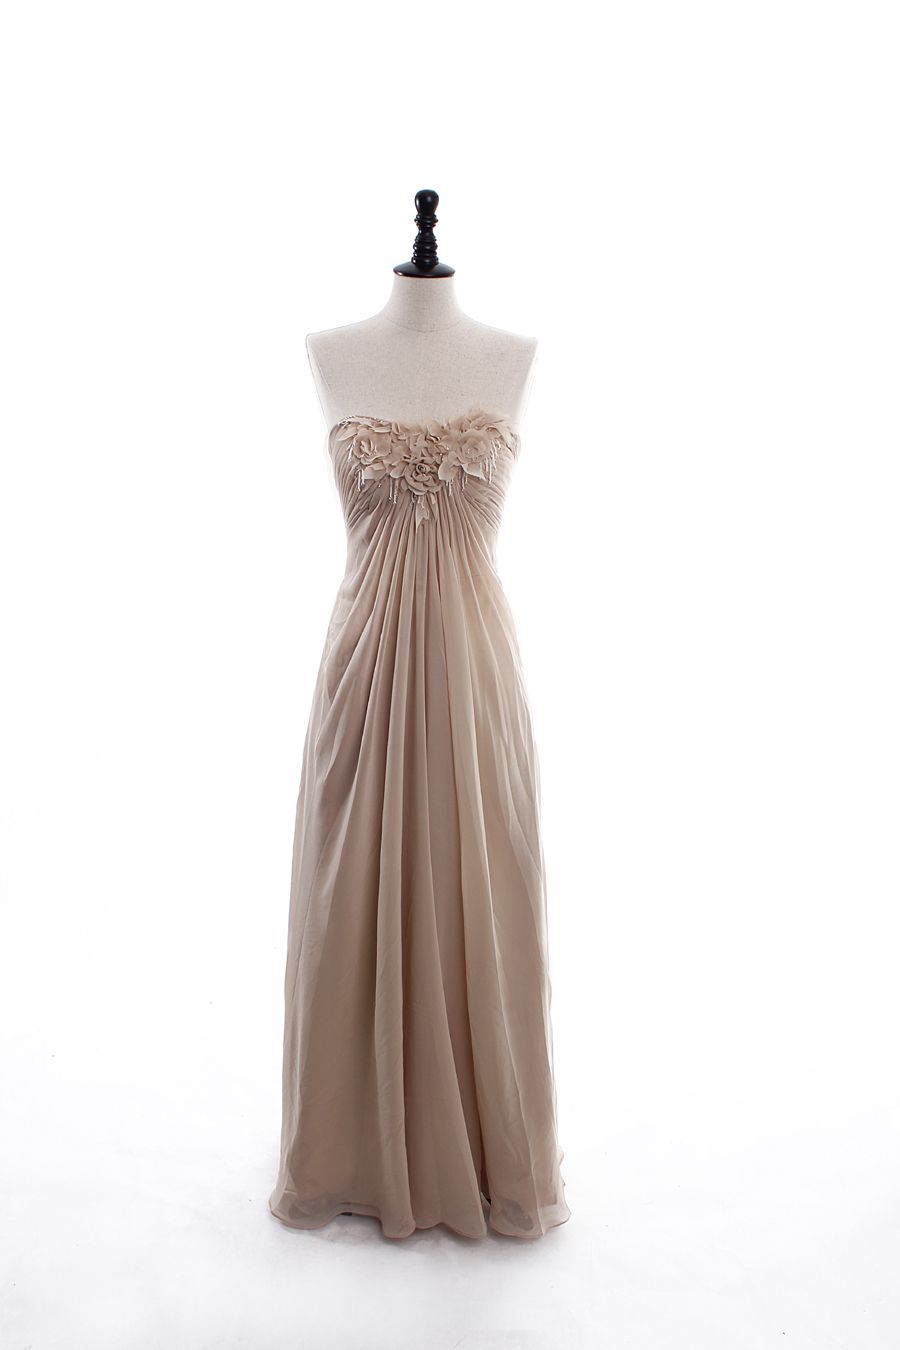 i love this! beautiful for my bridesmaid dresses :]